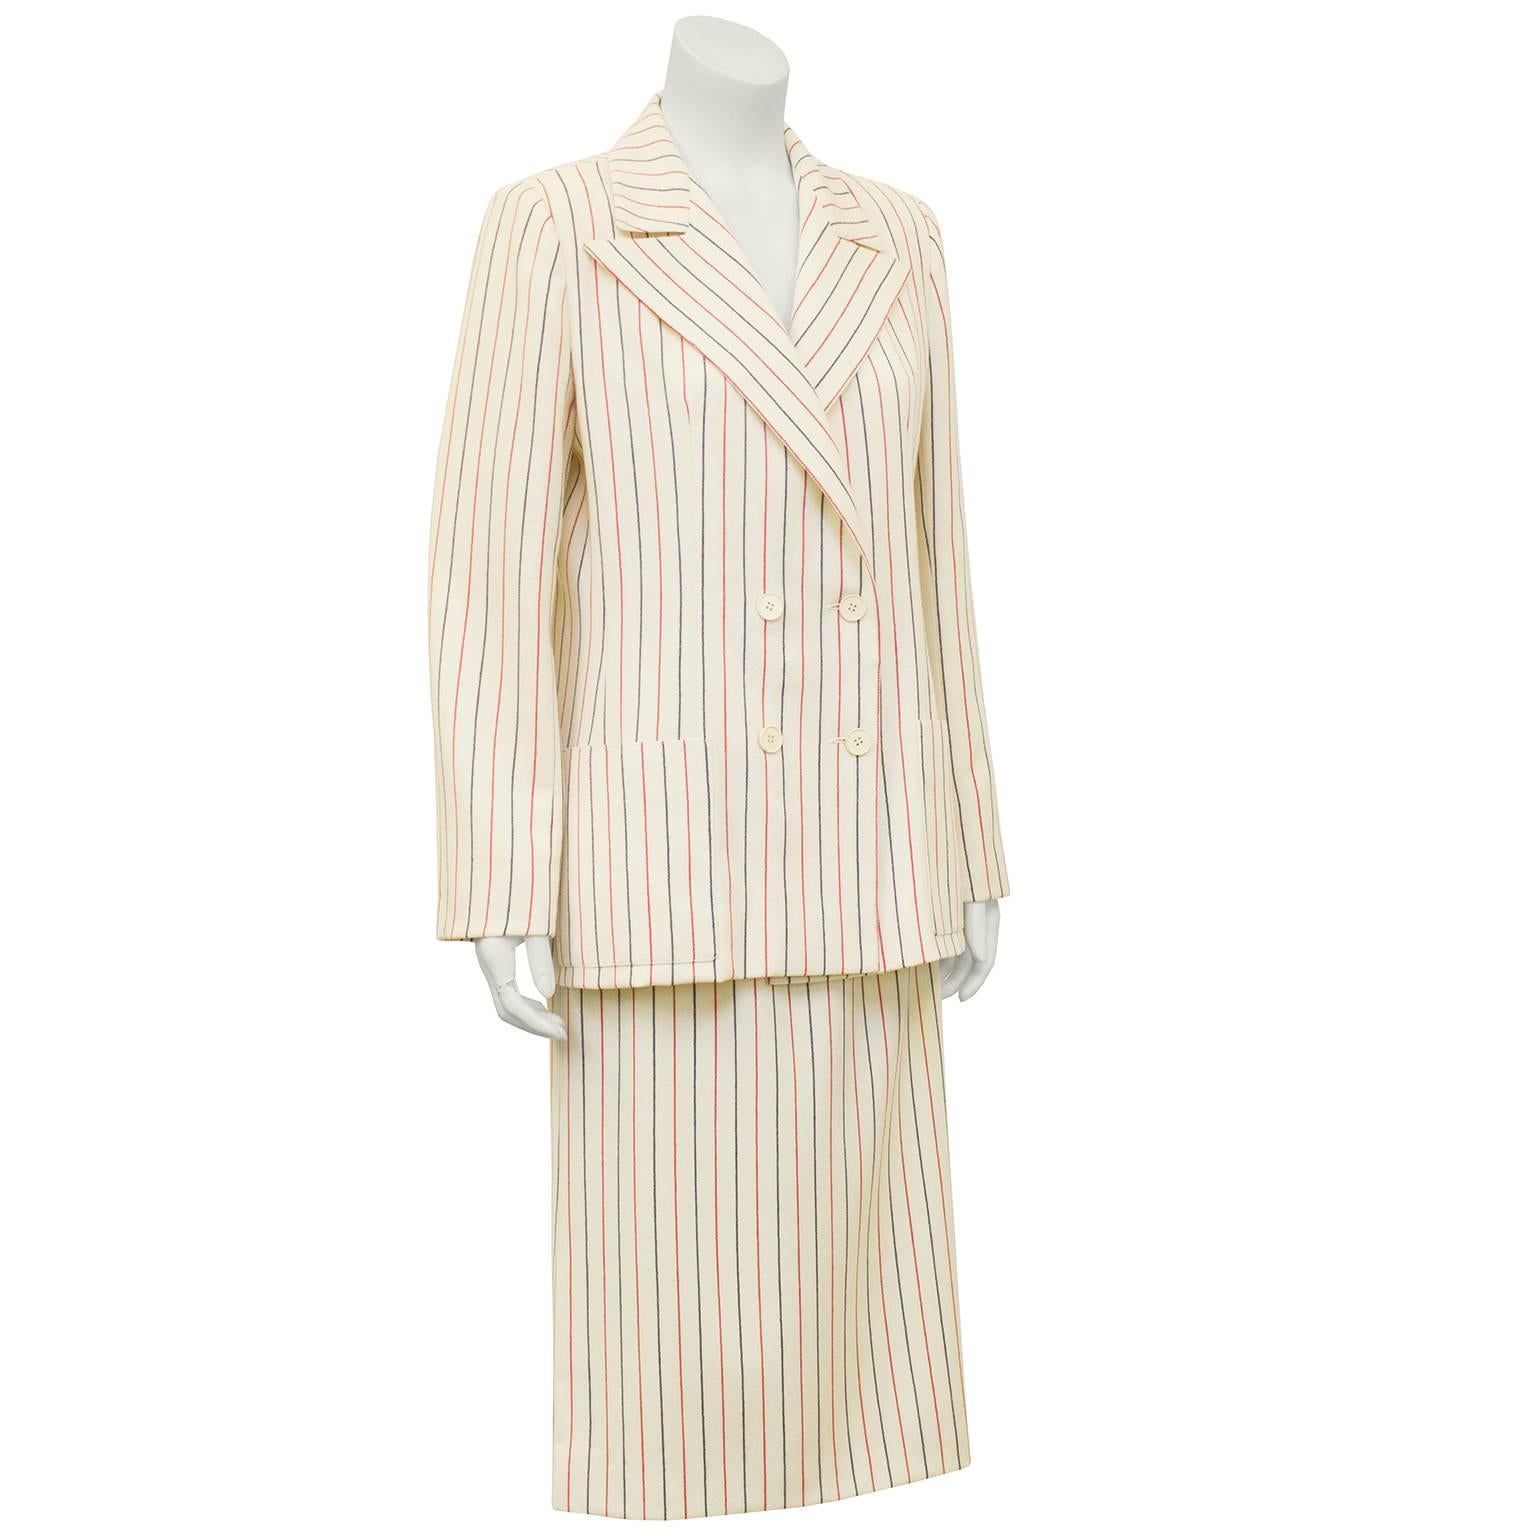 1980's Scherrer cream with red and navy blue pin stripe wool skirt suit. Double breasted jacket with cream buttons, oversized collar and patch pockets. High waisted knee length skirt. Can be work together or separately. Excellent very good vintage